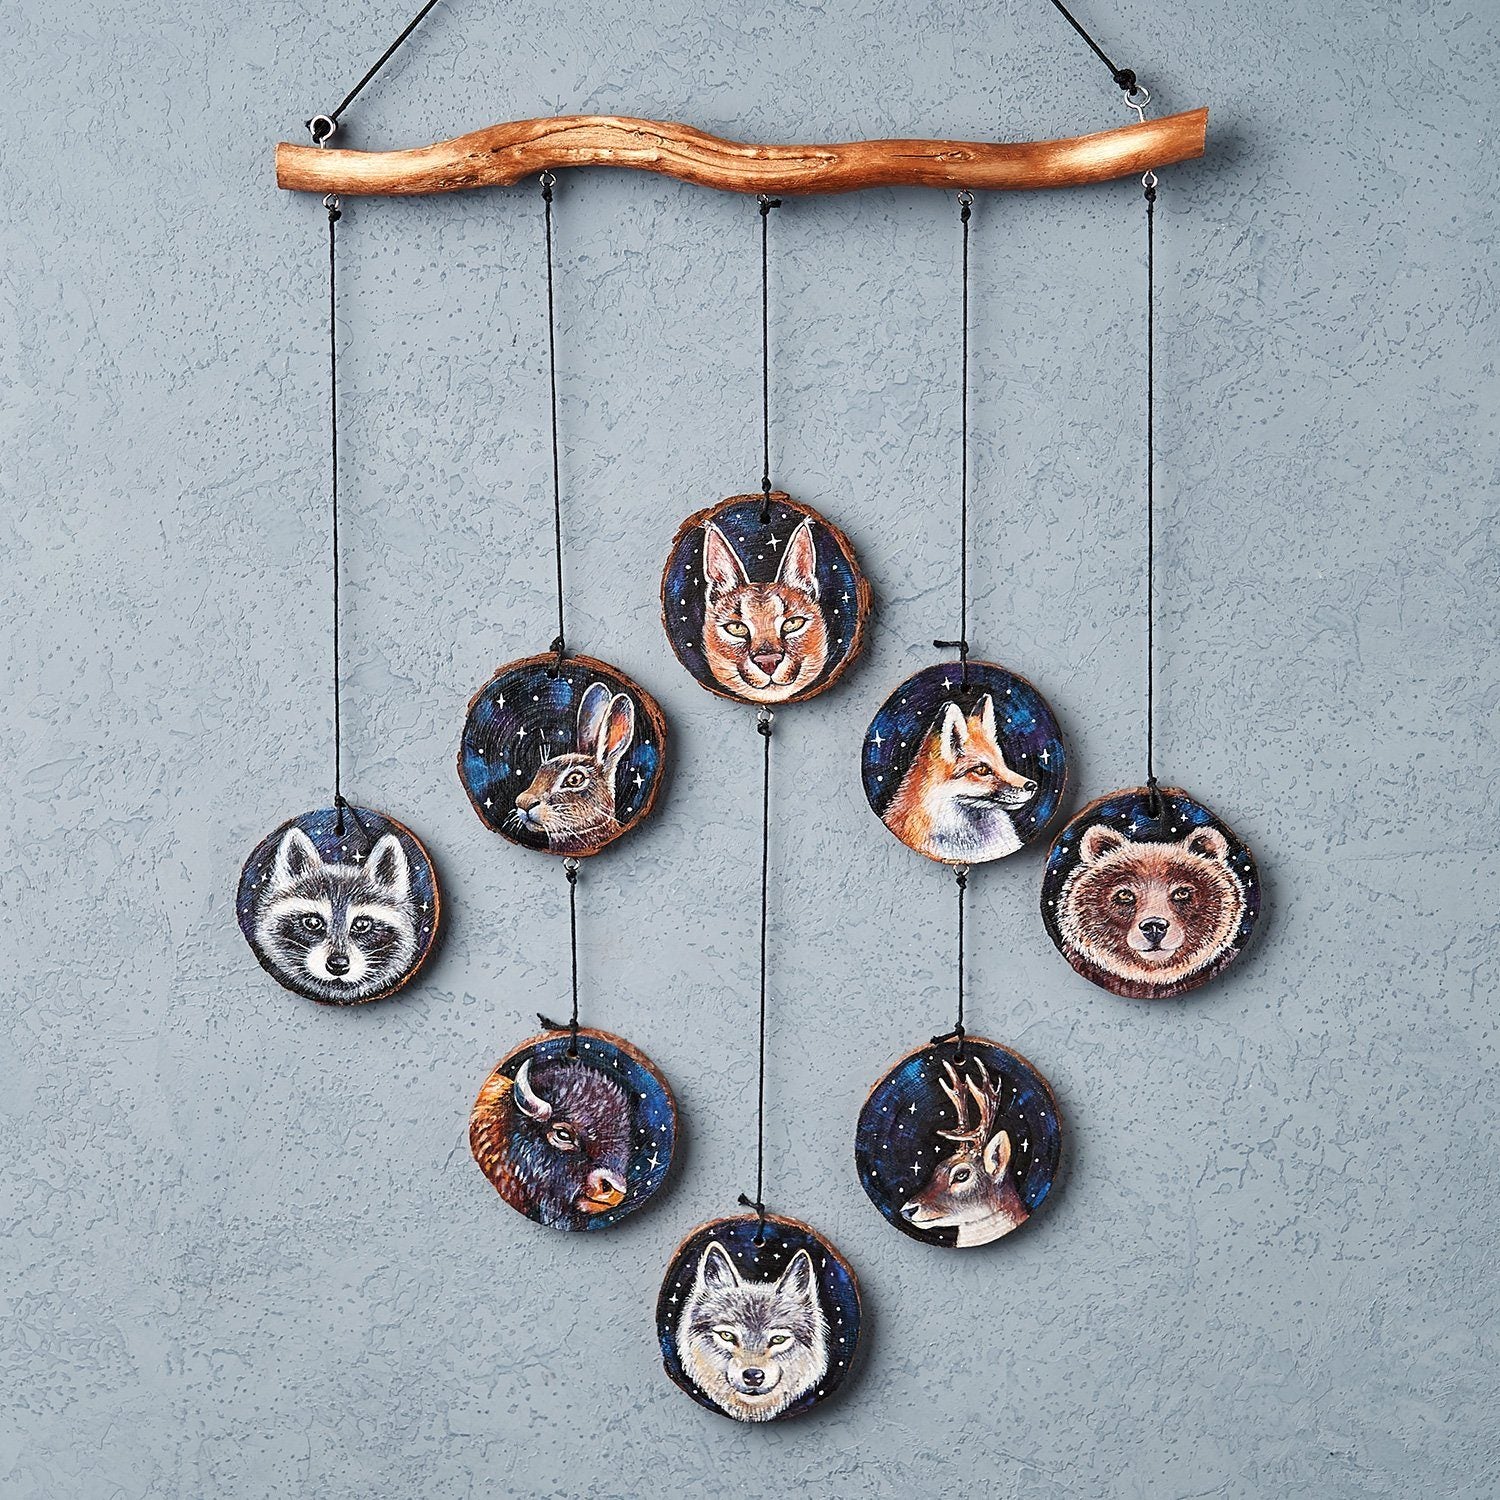 Hanging Ornaments with Wood Slices 